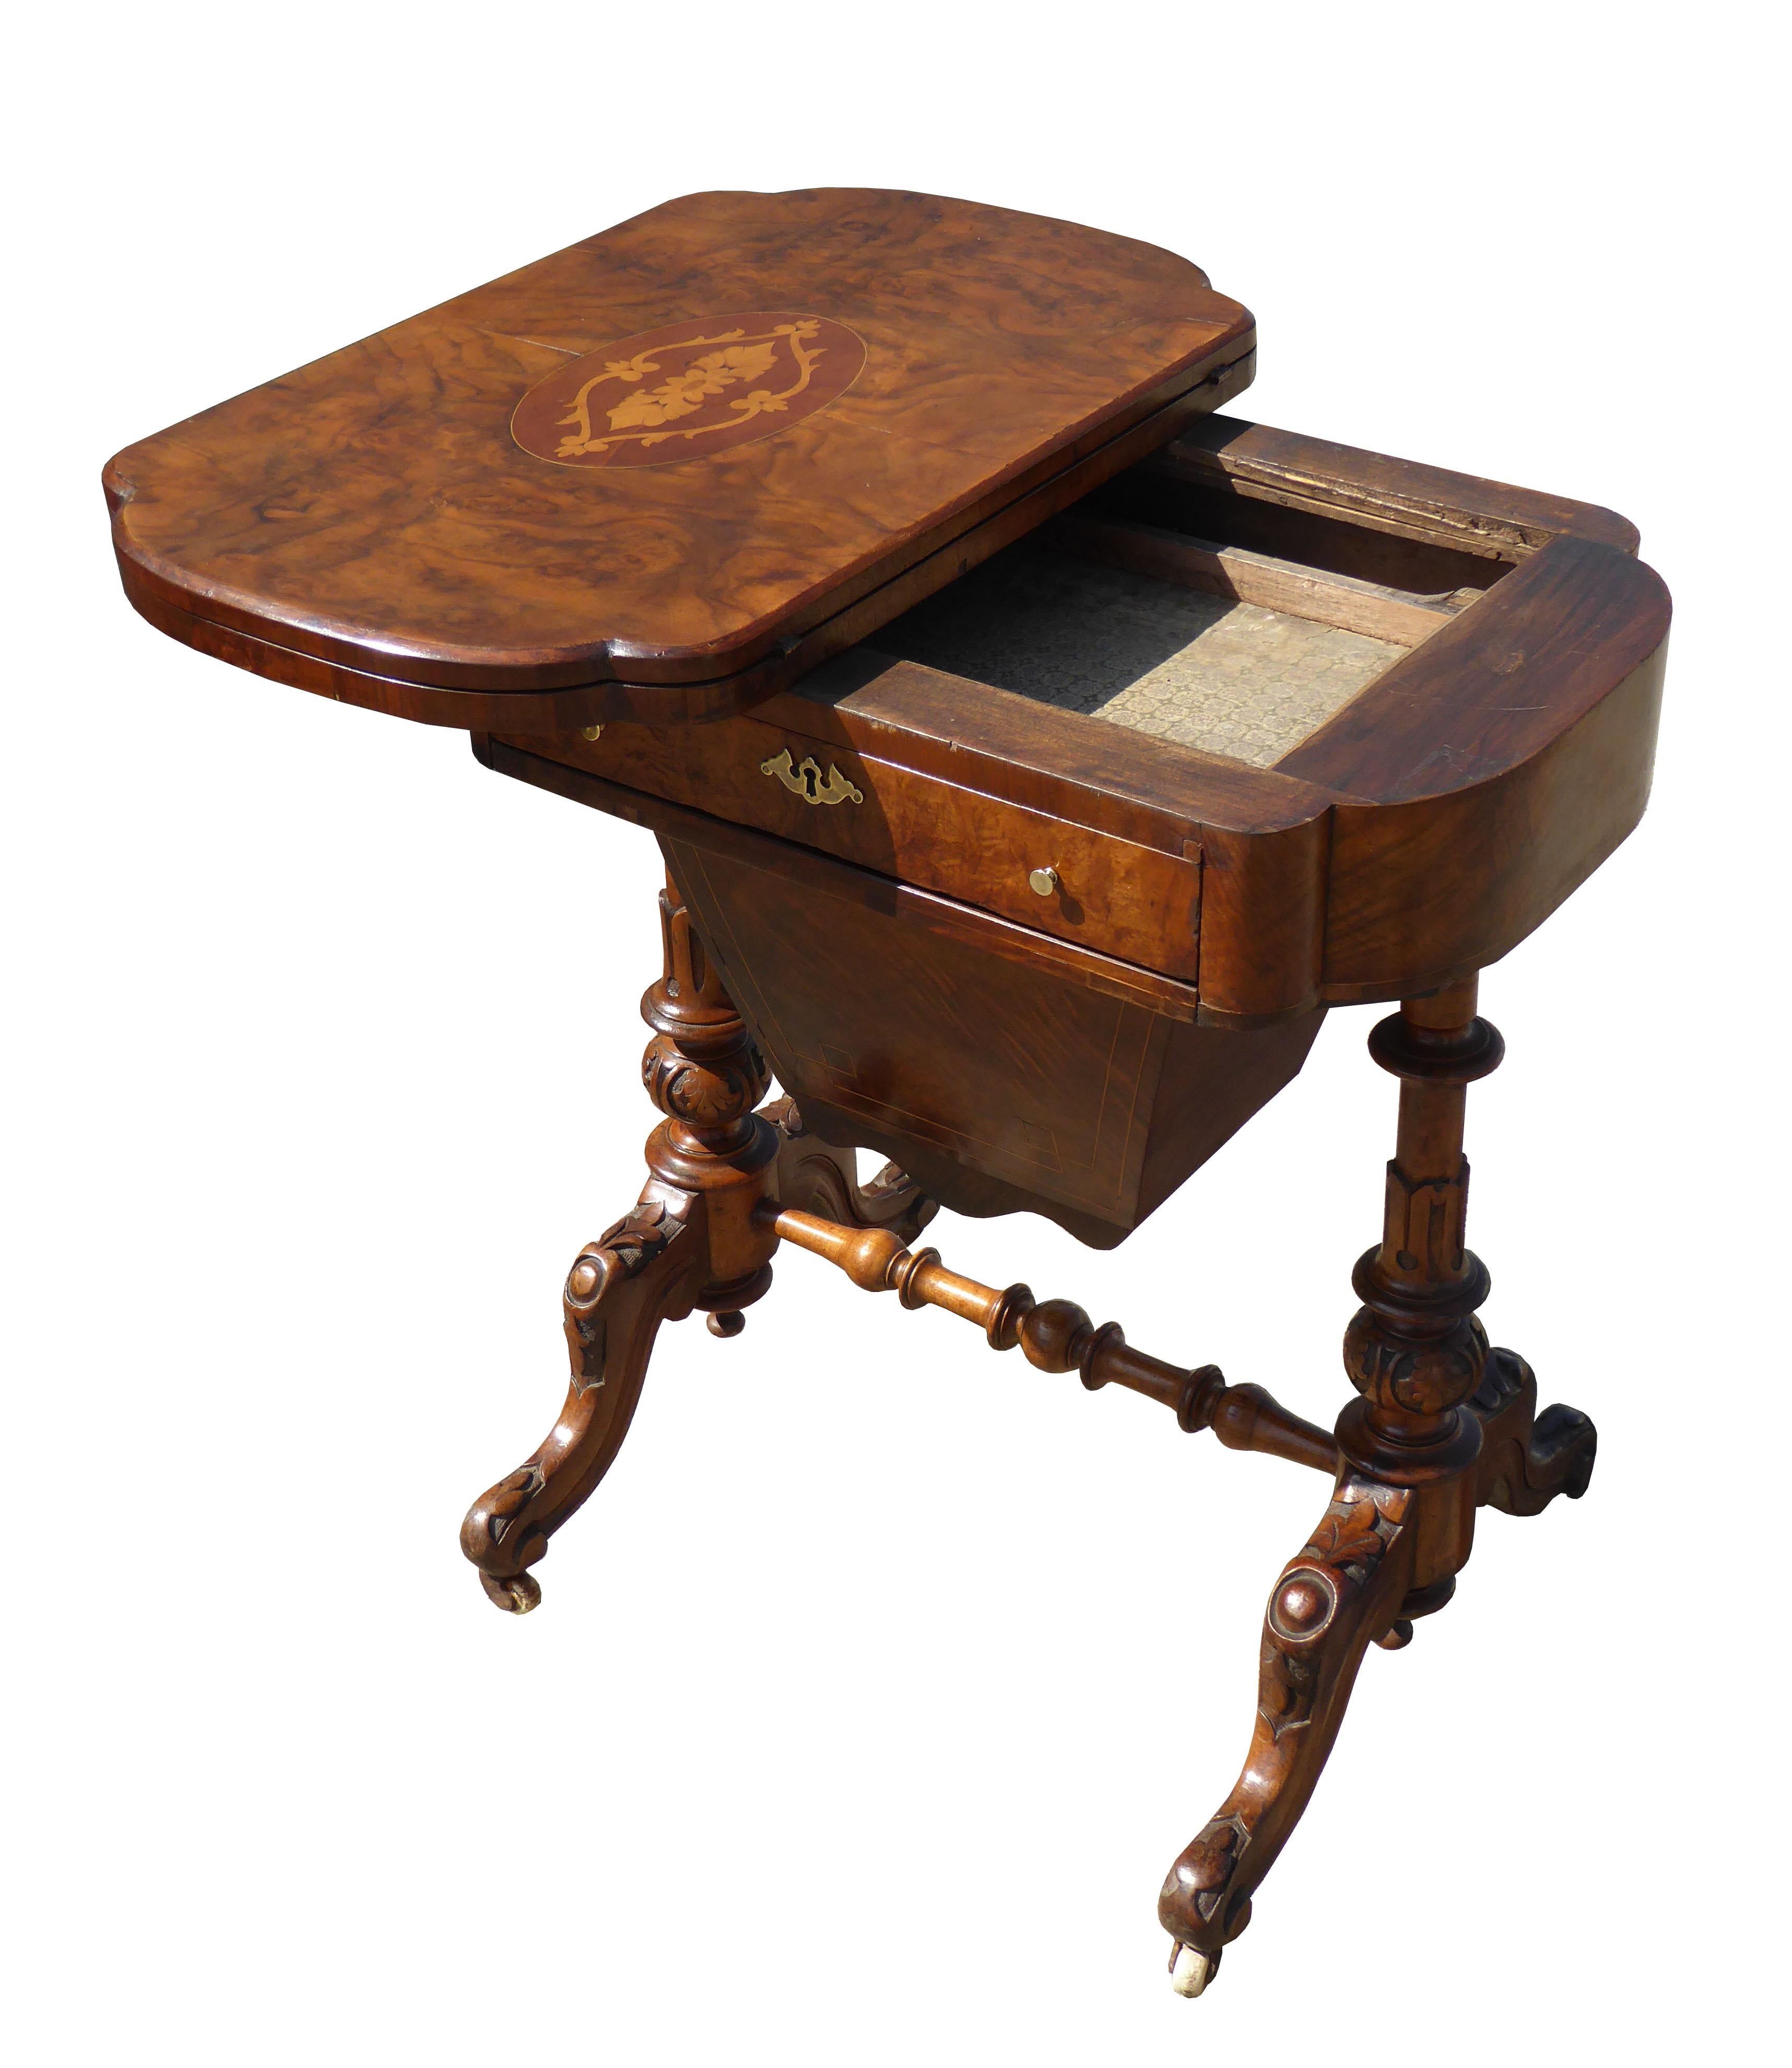 For sale is a Victorian burr walnut games table / work table, with an inlaid top swiveling and folding to reveal an interior for games. This is above a drawer, with a pullout / pull-out basket below. The table stands on ornately carved legs, joined